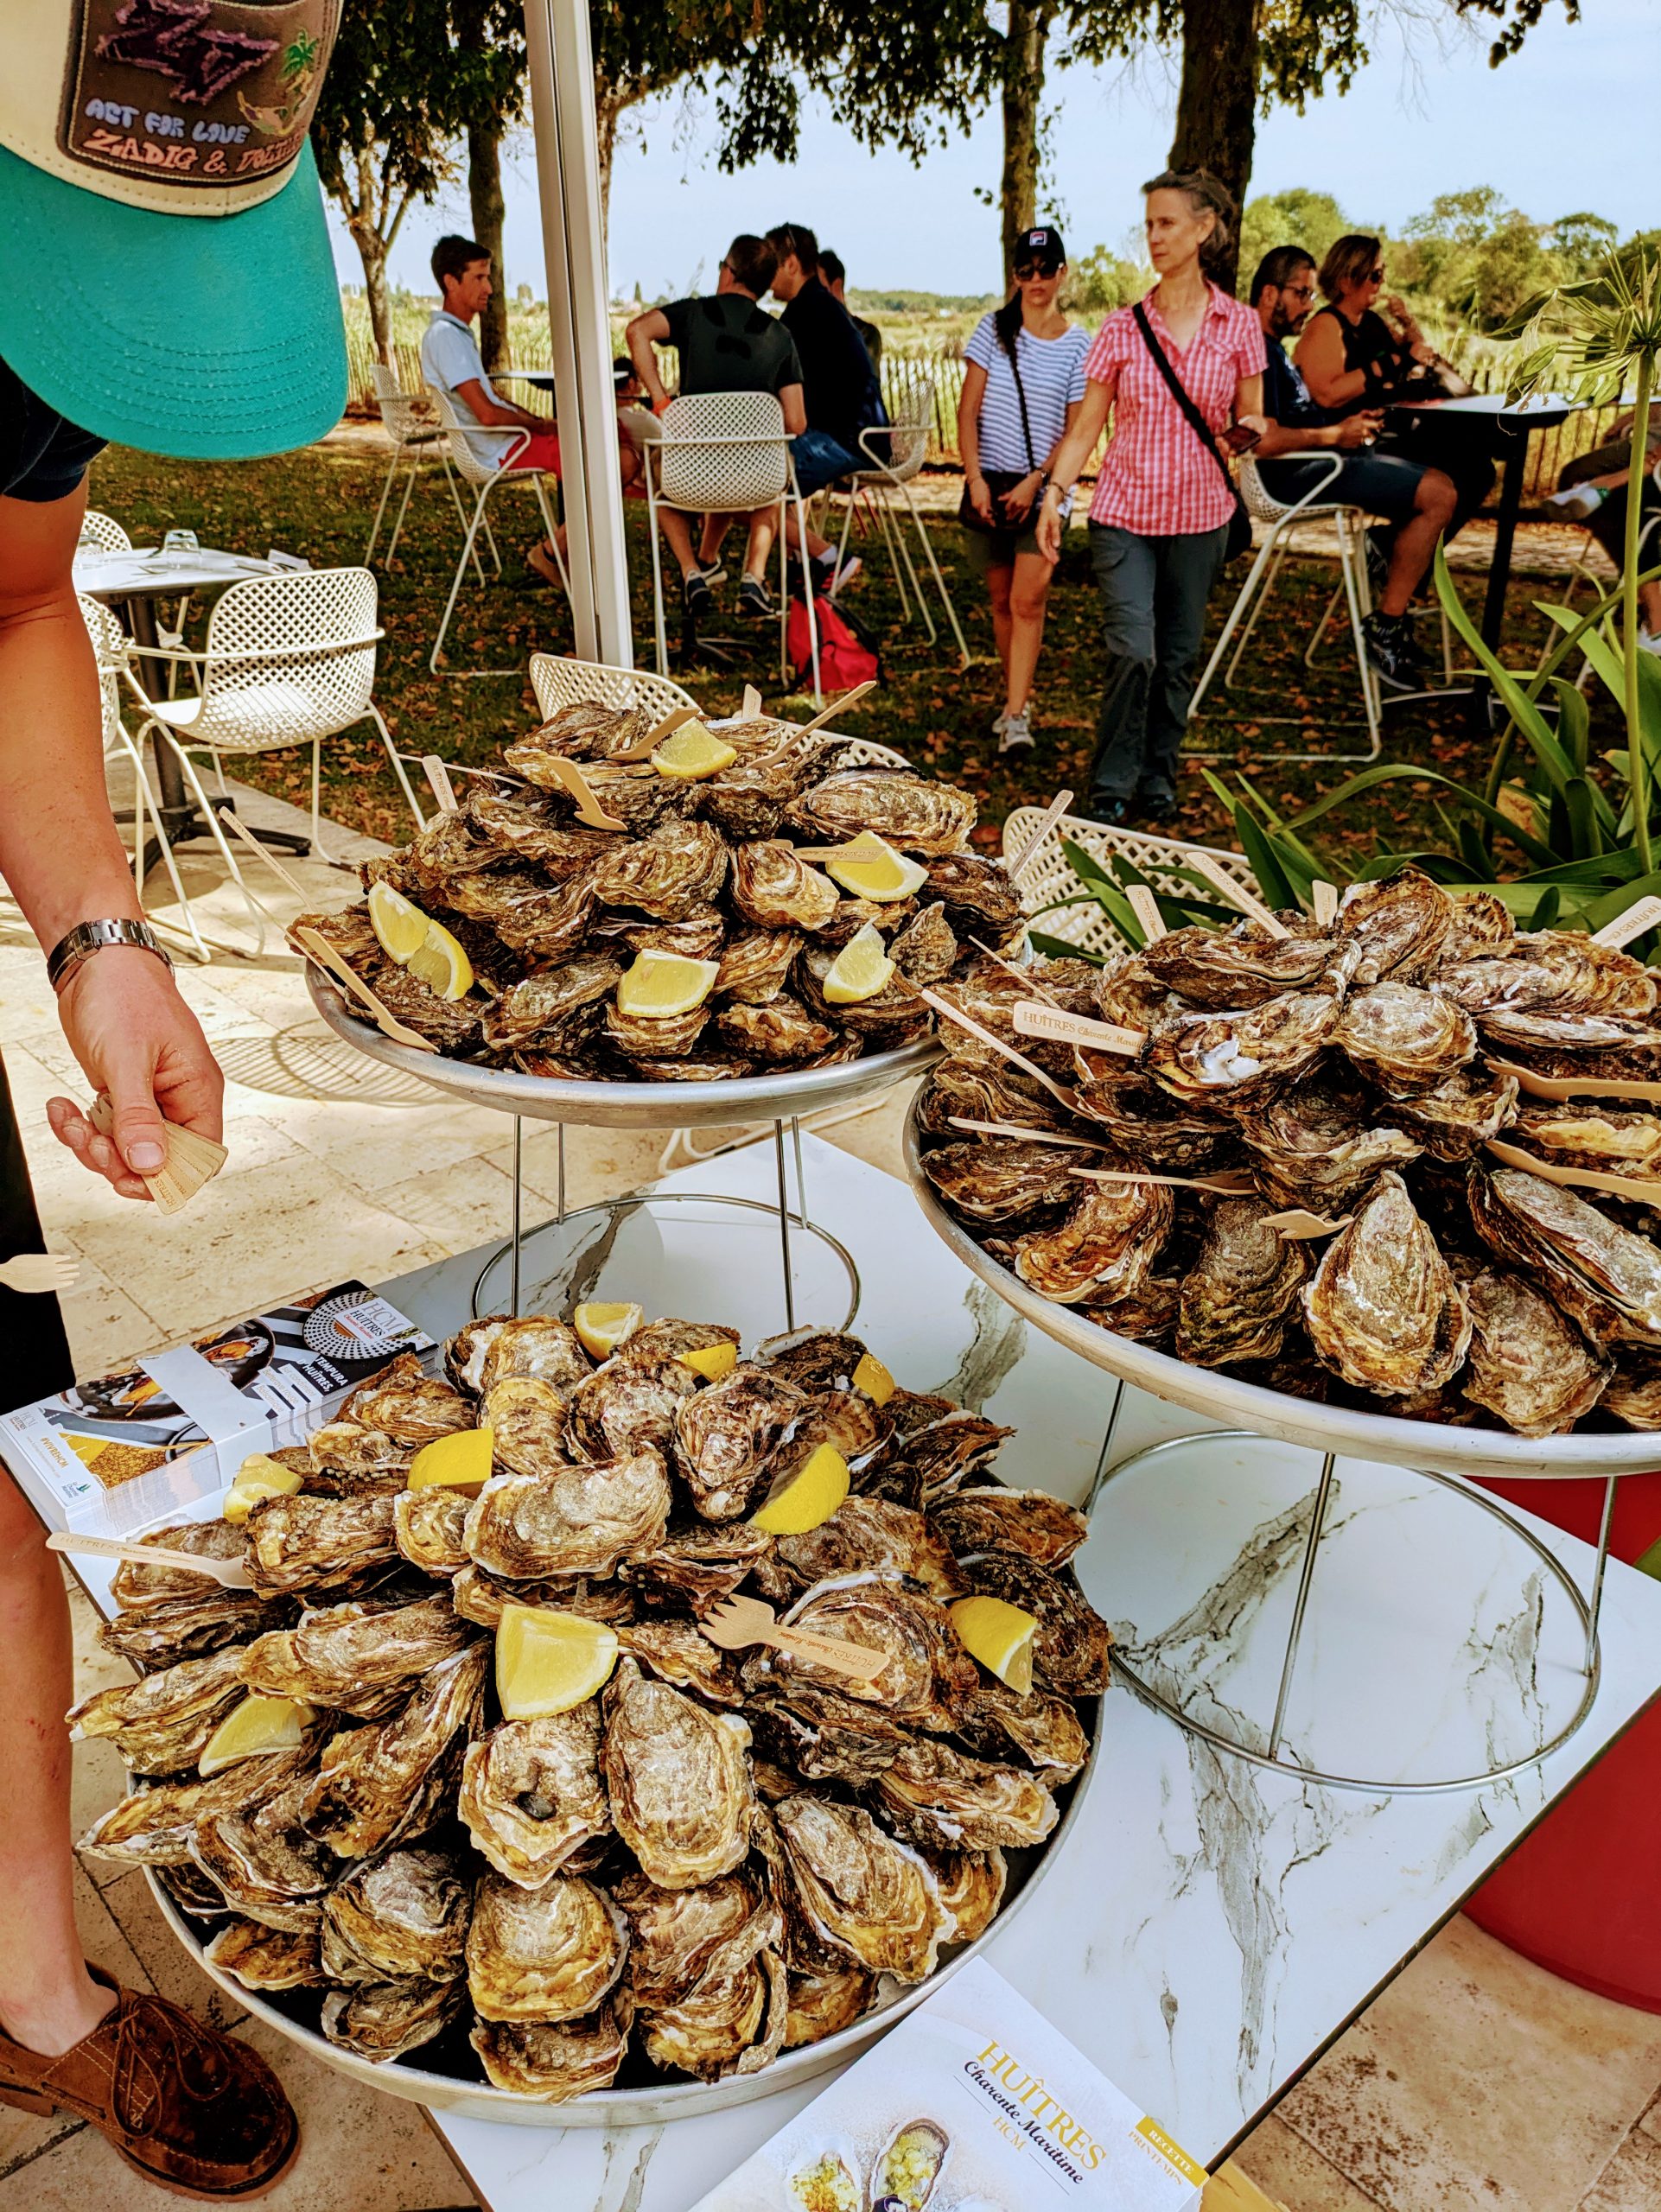 Taste local products at a French oyster farm in Rochefort, near the Atlantic Ocean